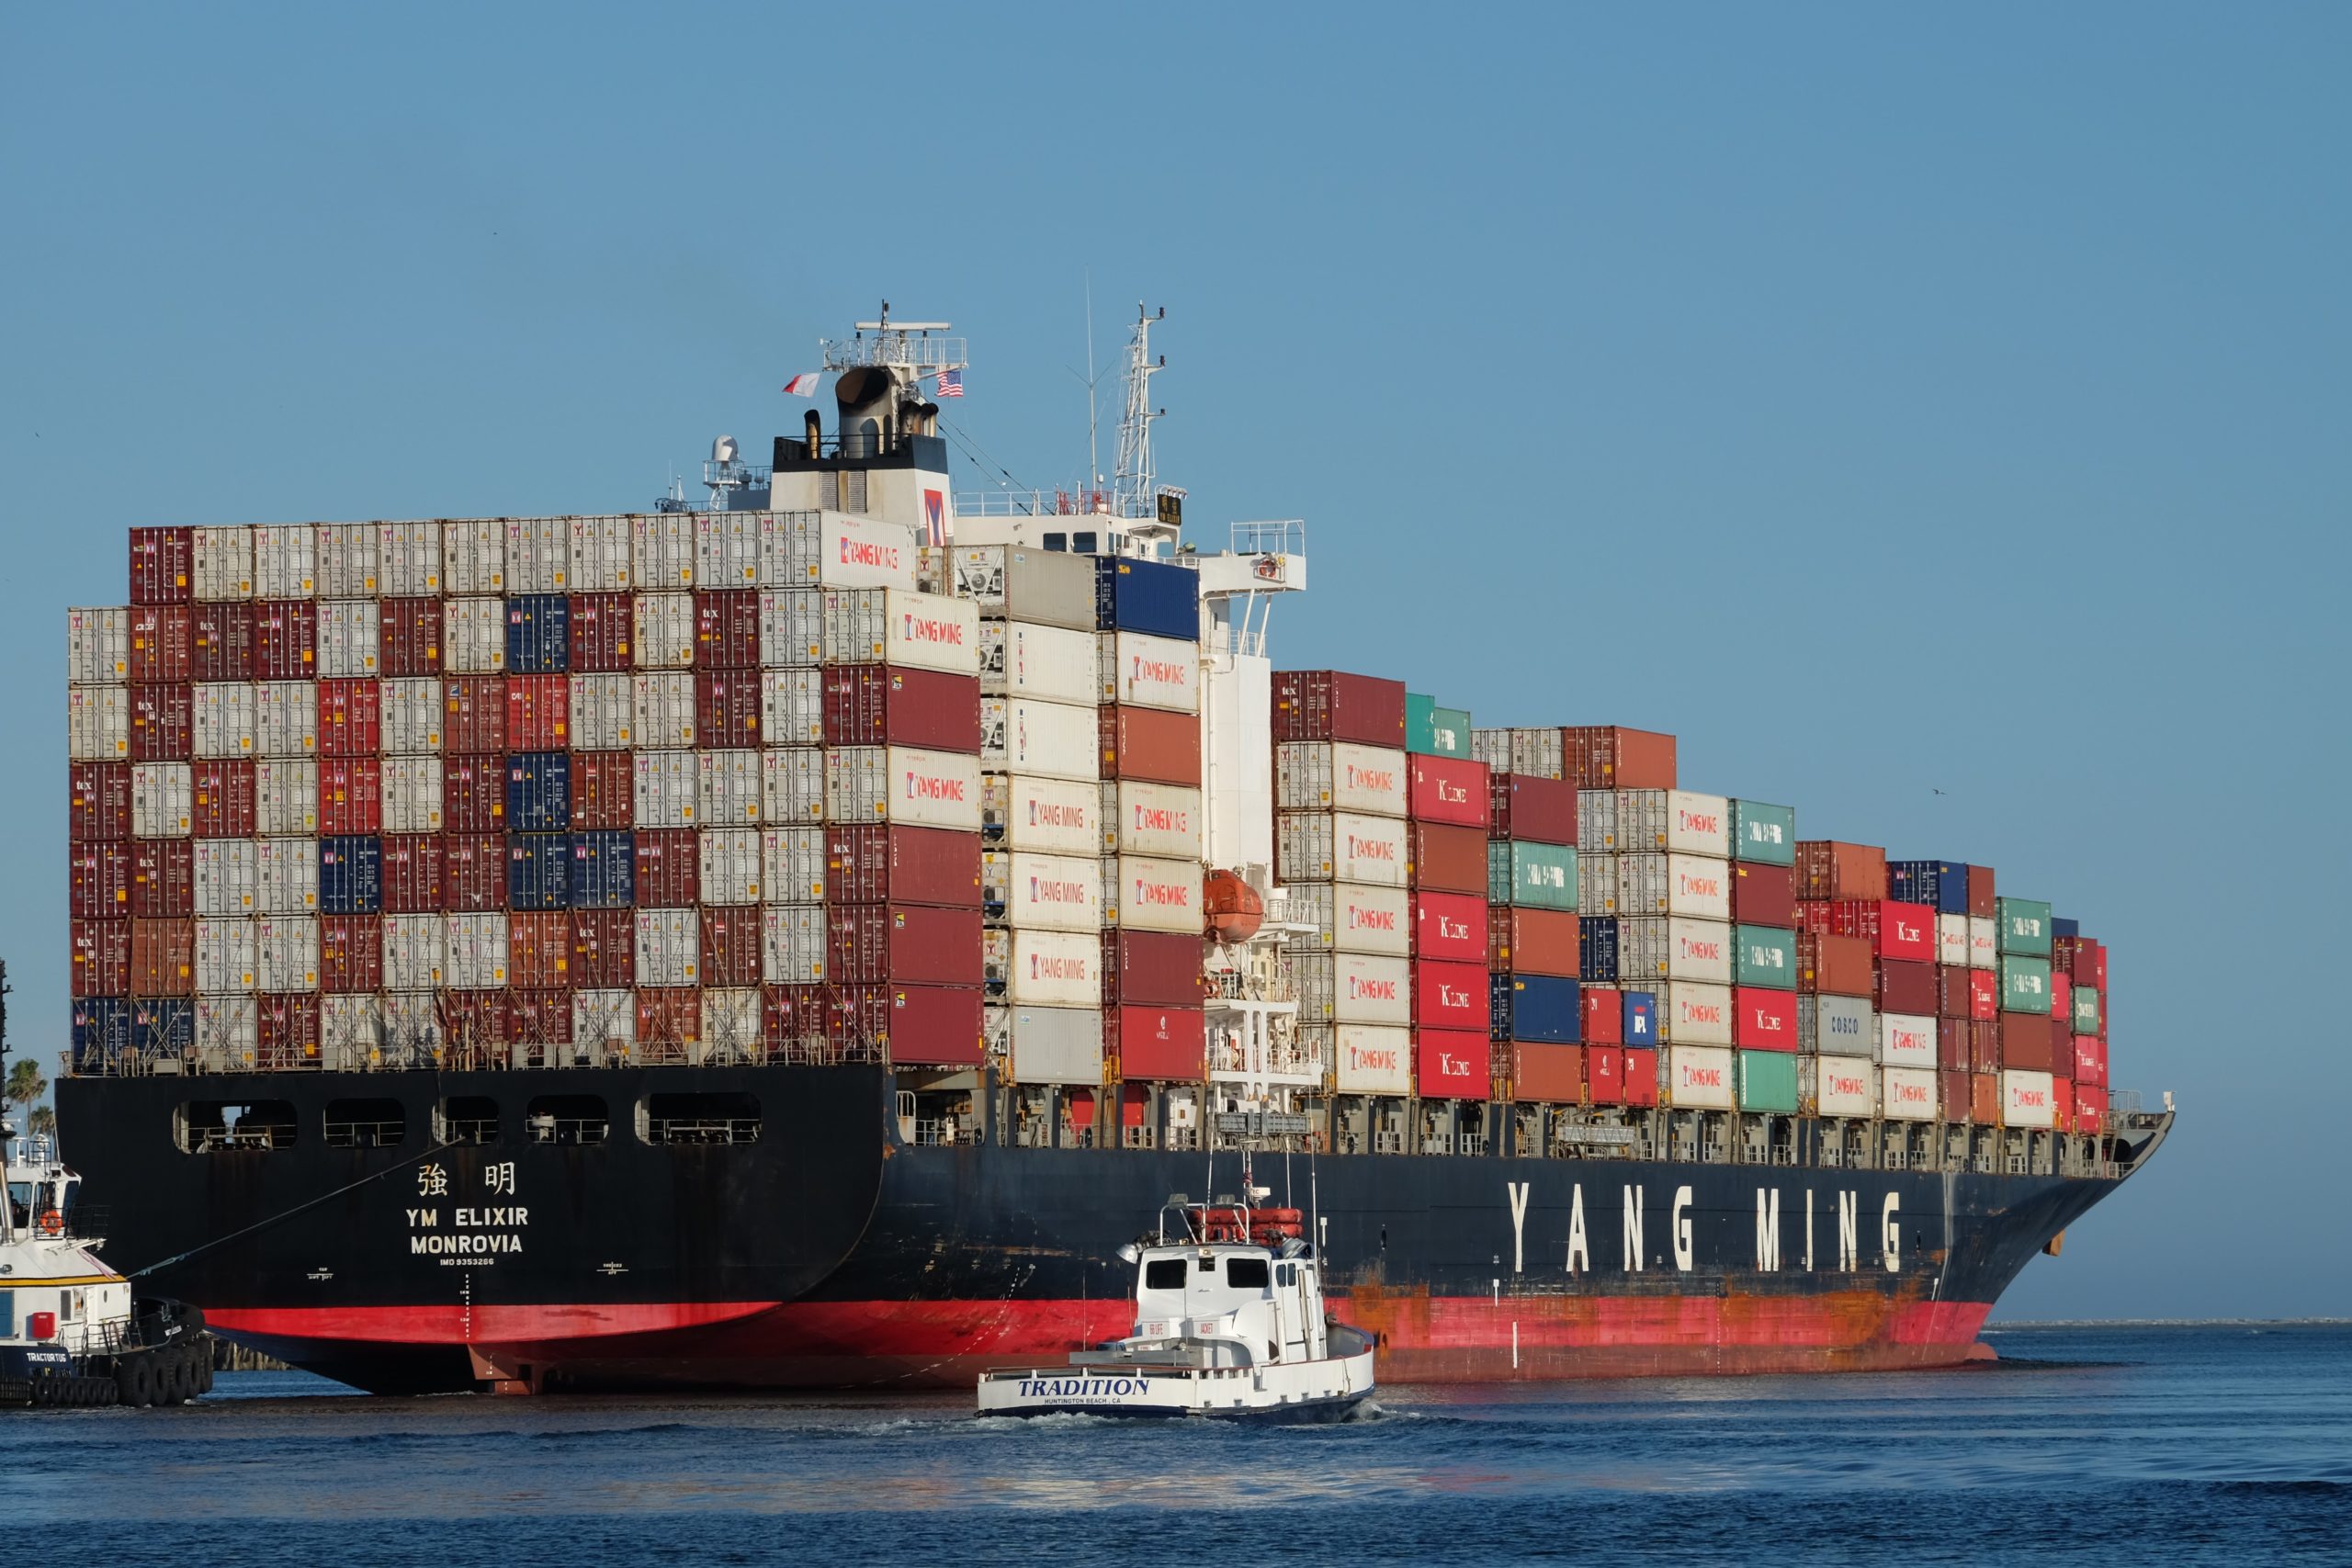 An image of a container ship